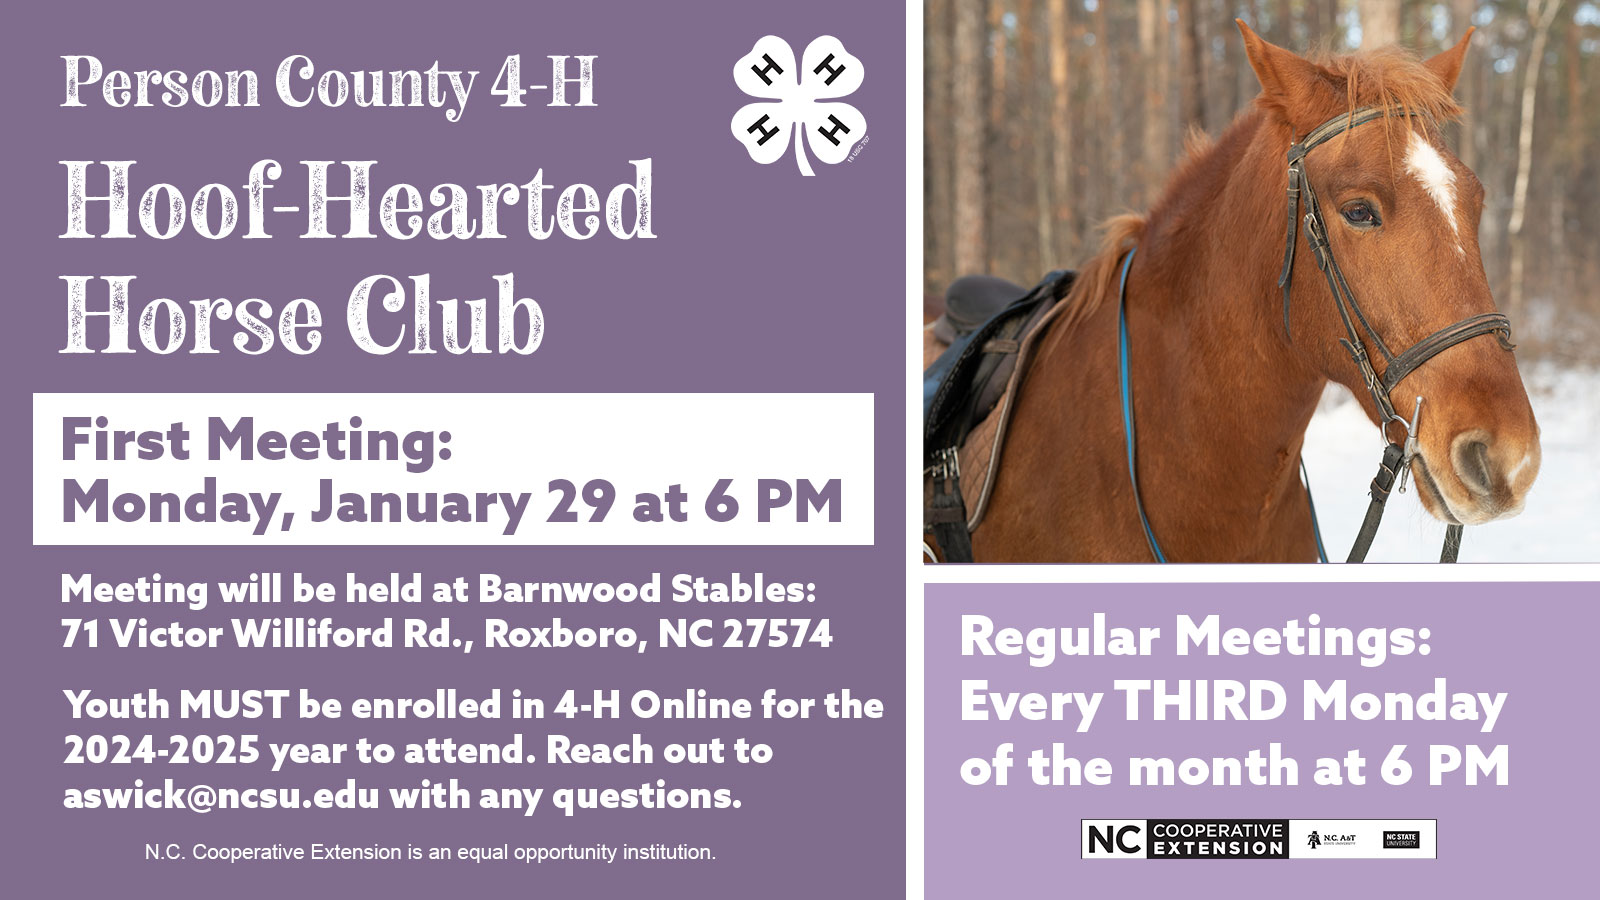 Hoof-Hearted Horse Club First Meeting. For more info contact 336-599-1195.